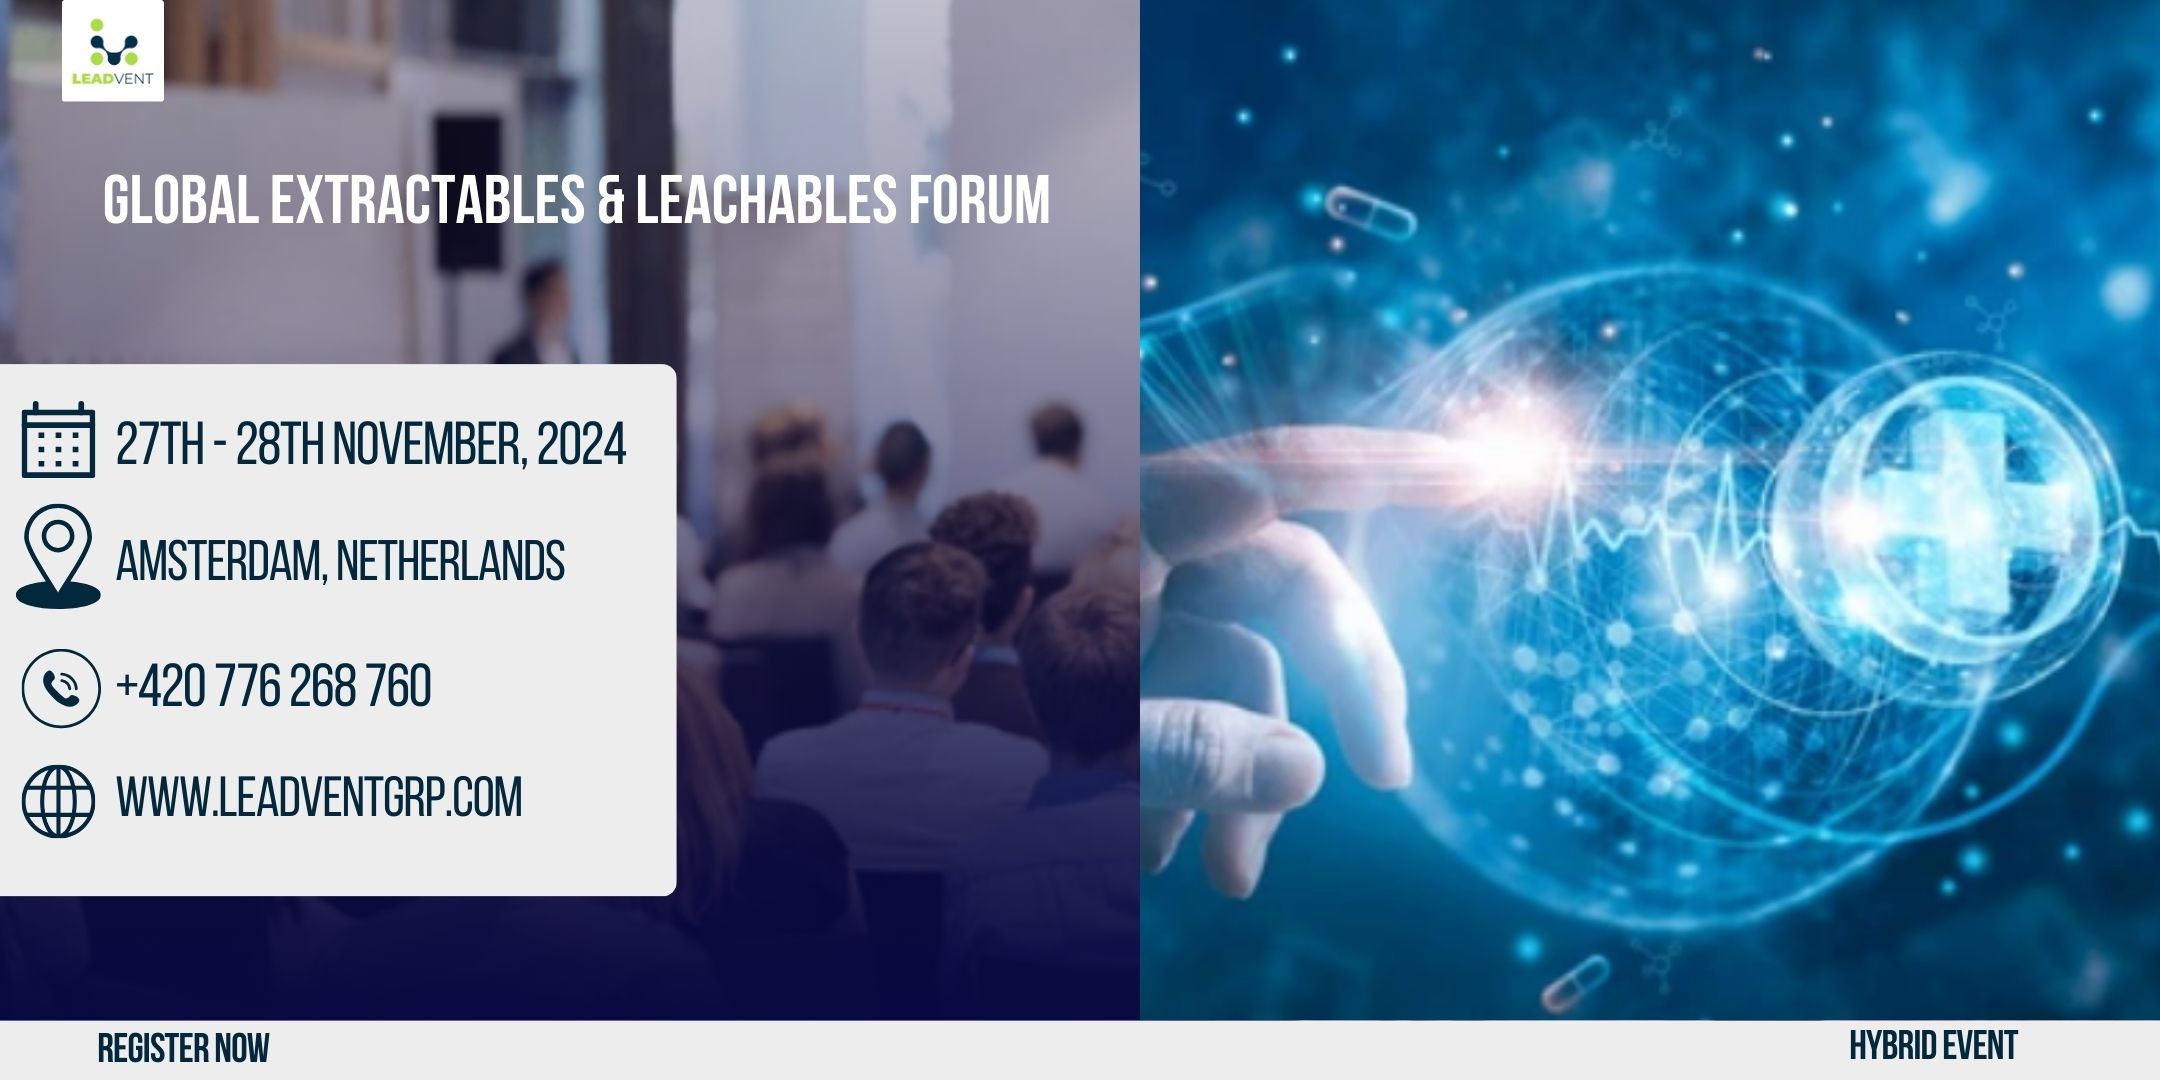 Global Extractables & Leachables Forum organized by Leadvent Group